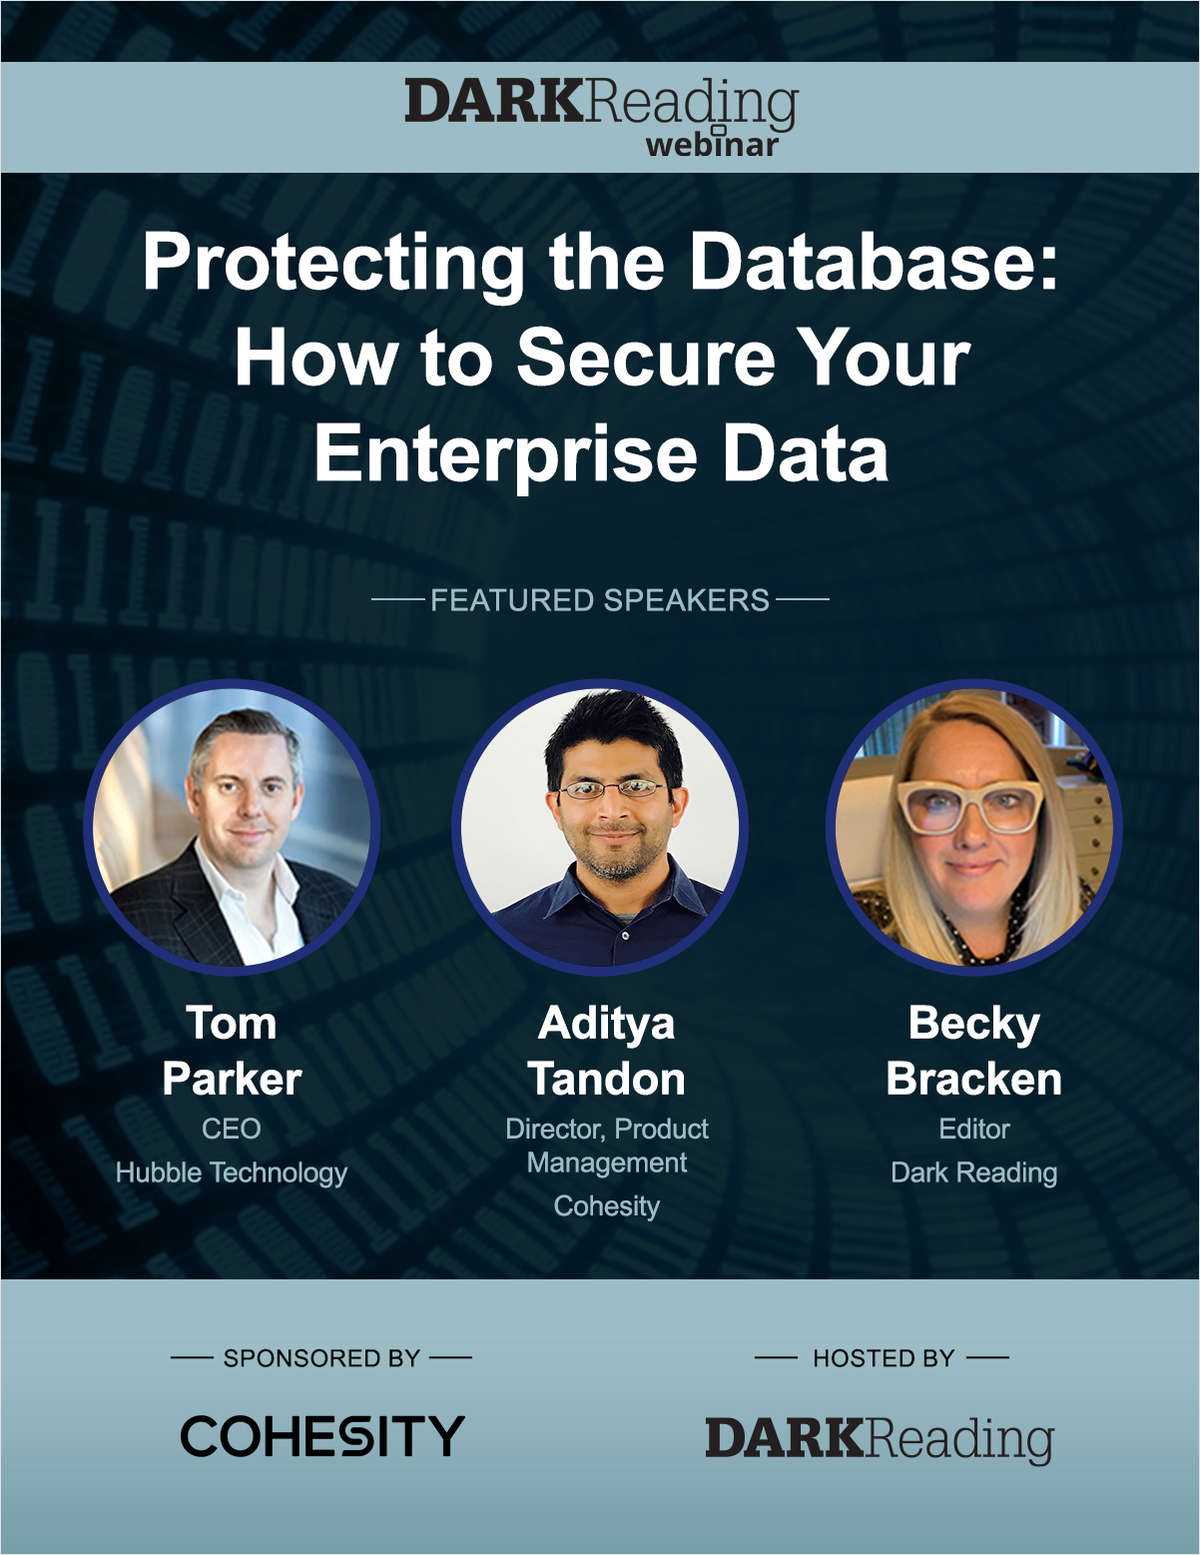 Protecting the Database: How to Secure Your Enterprise Data